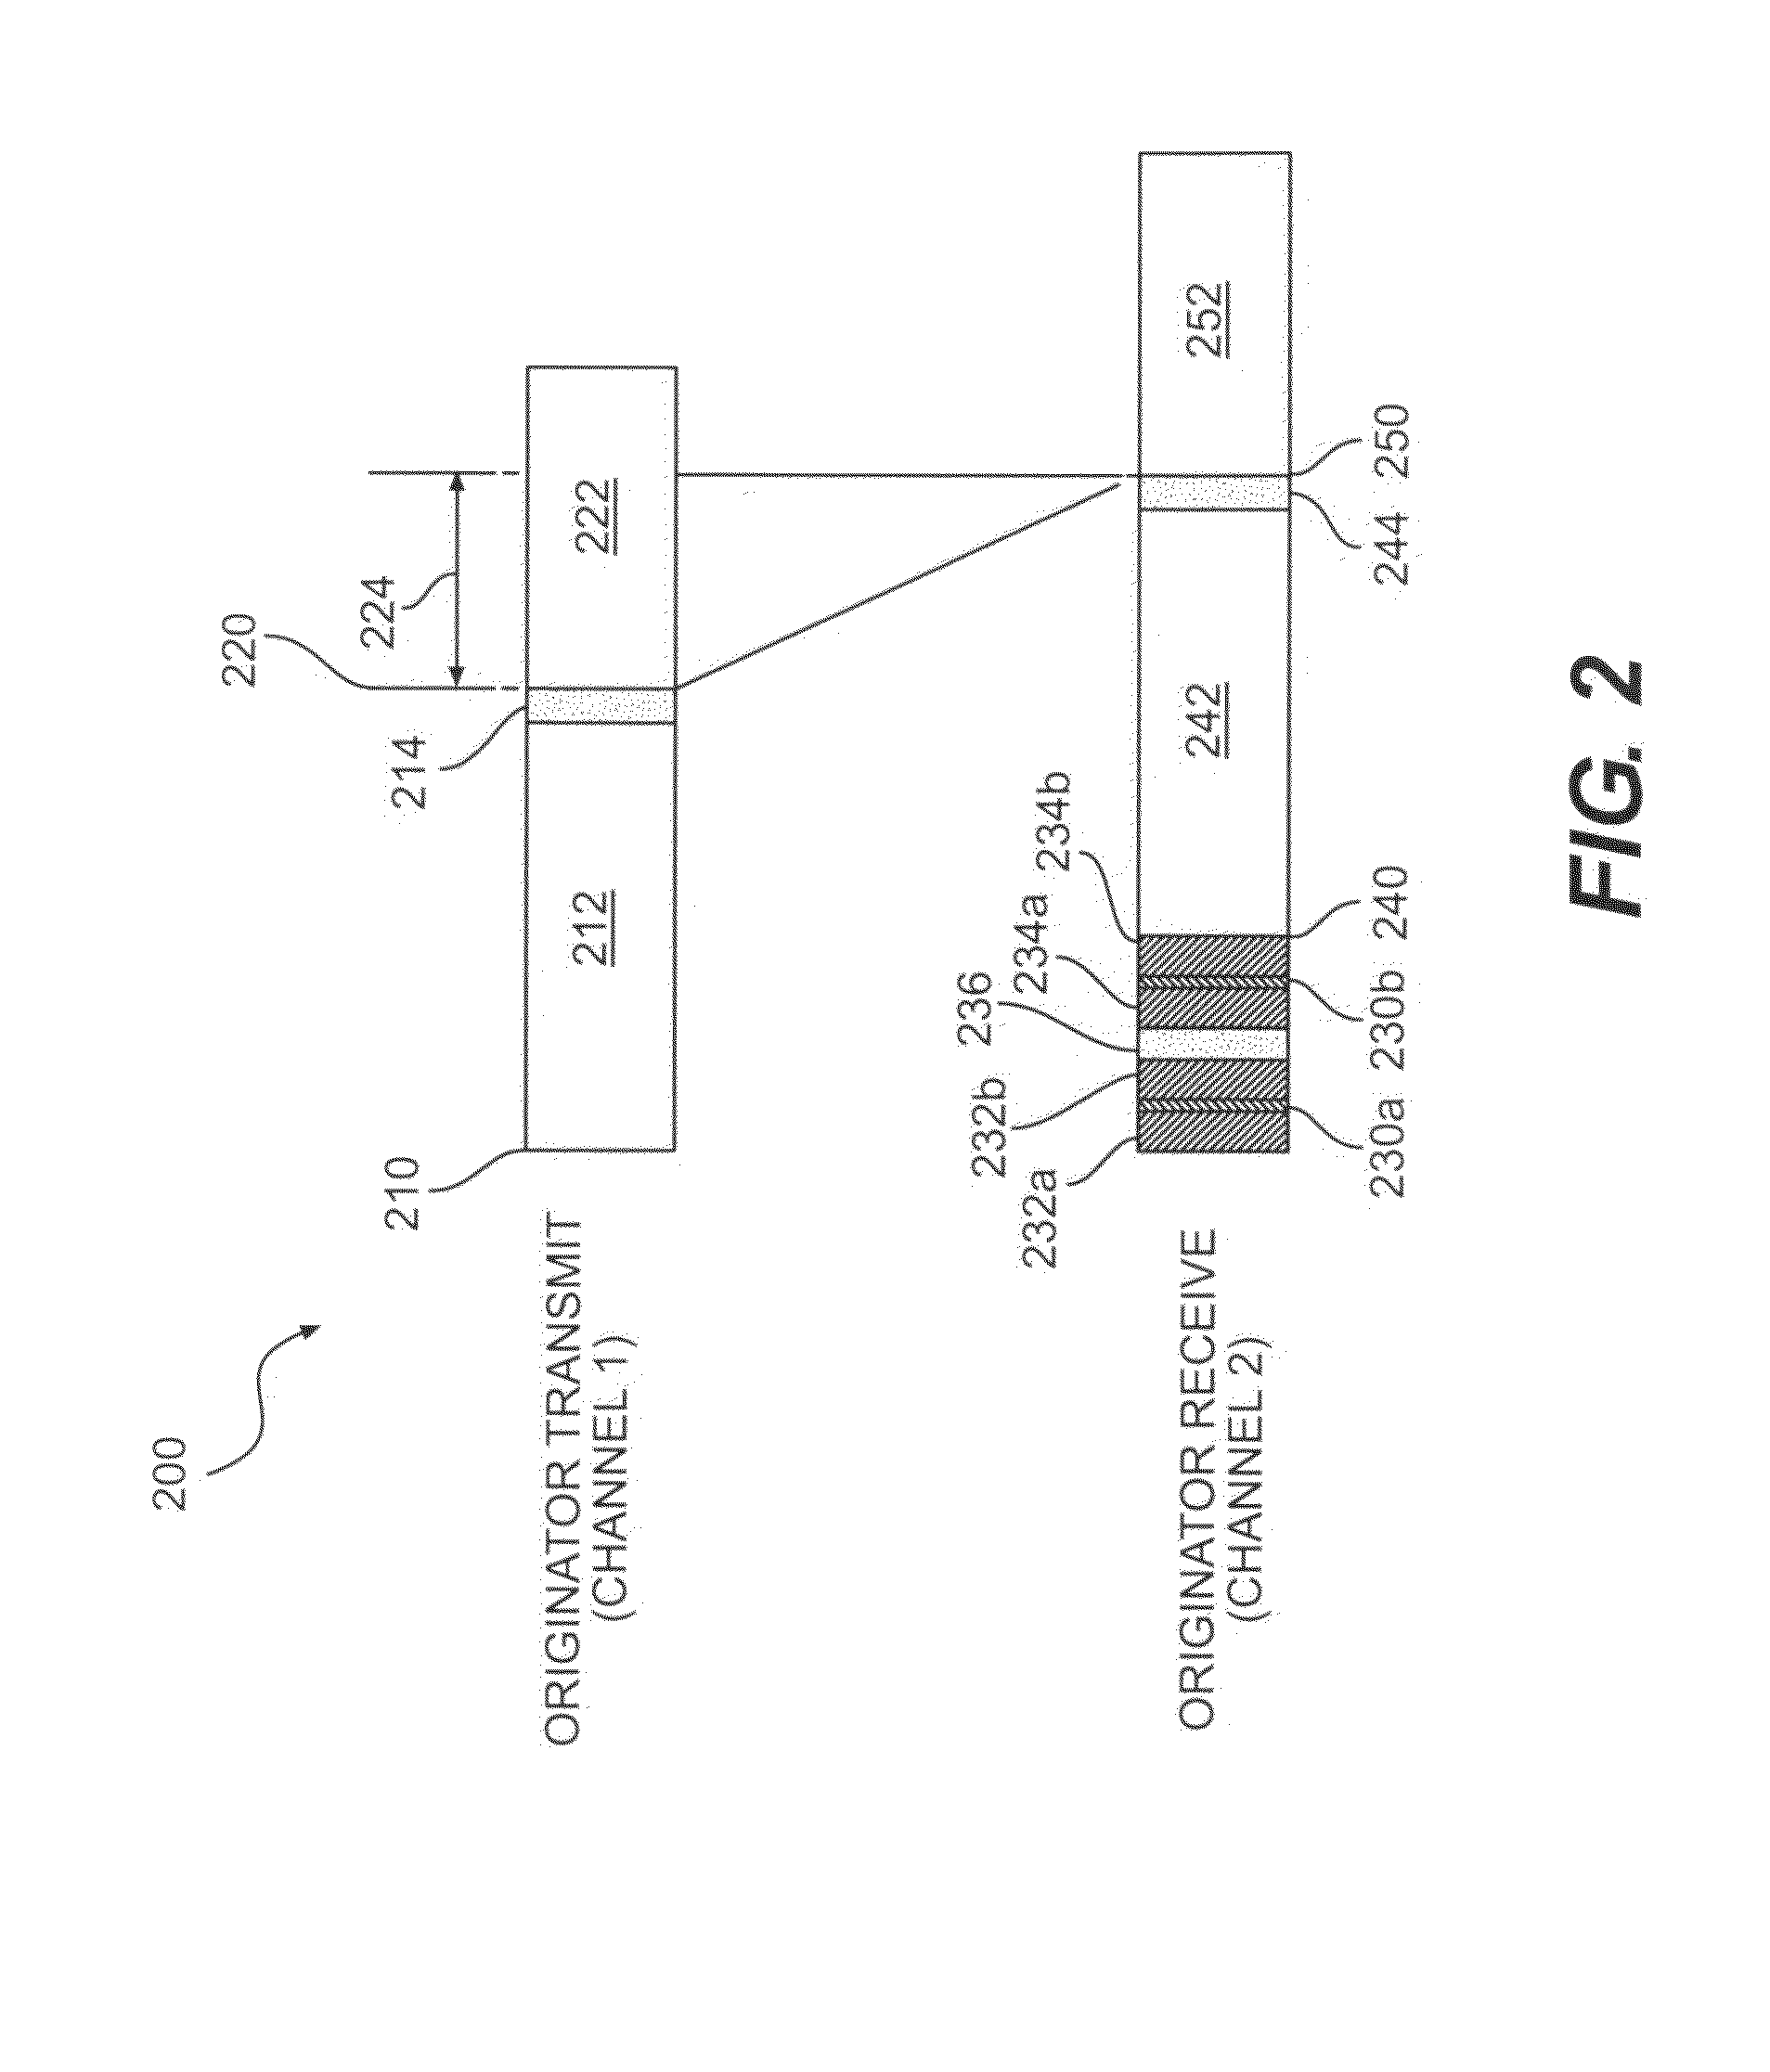 High-precision radio frequency ranging system